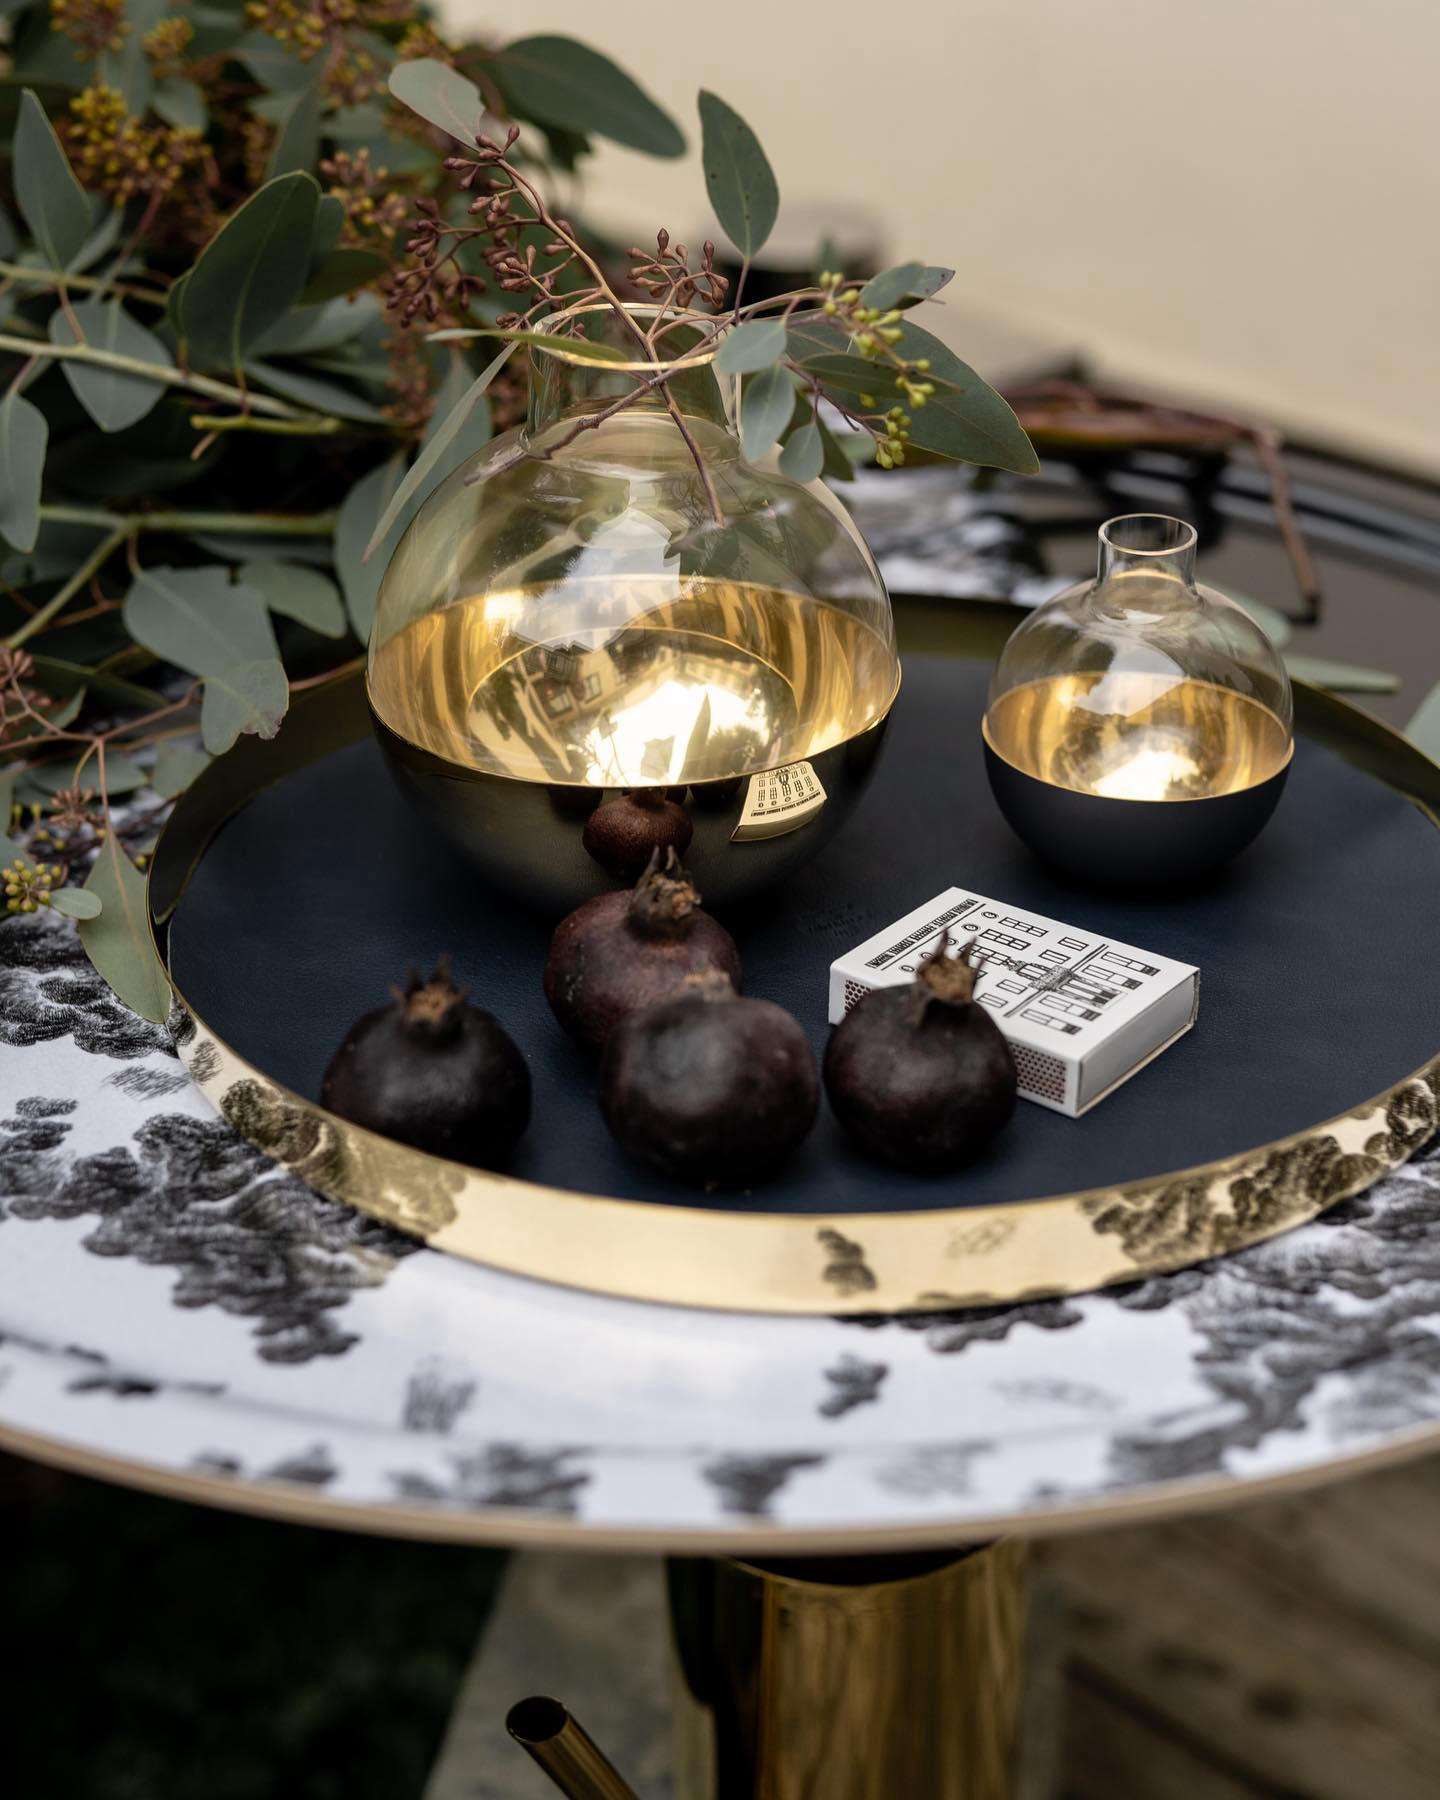 Skultuna - Karui tray and Pomme vases, a perfect match for Christmas